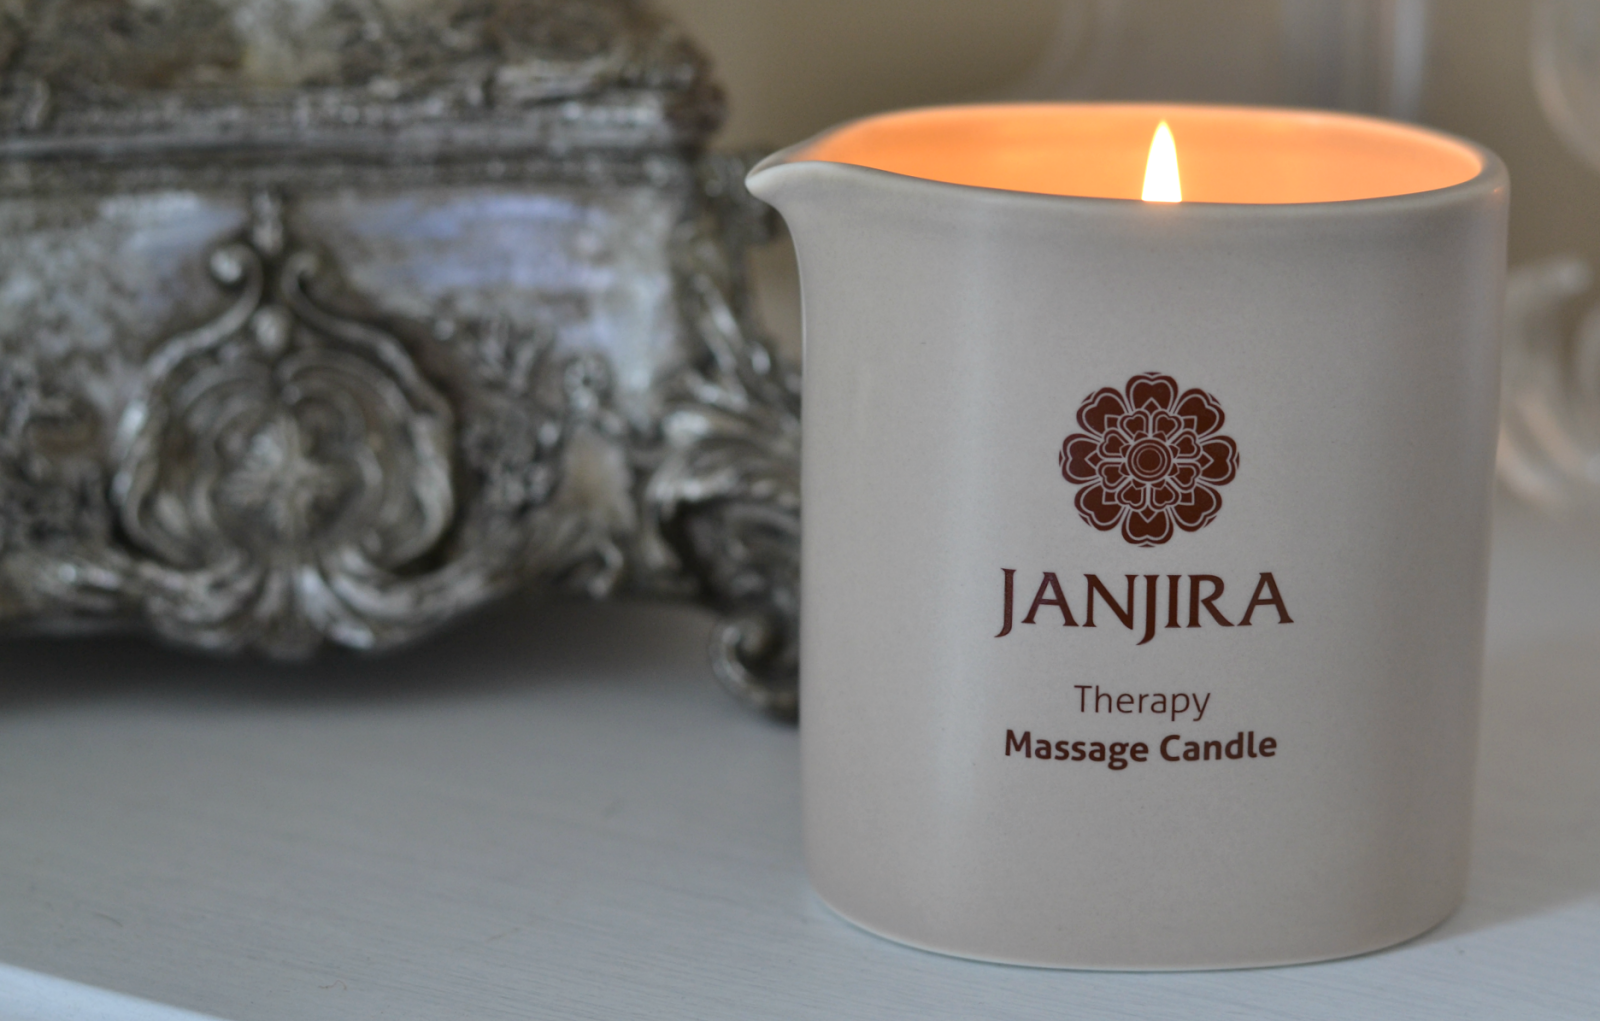 Janjira Therapy Massage Candle Practical And Nourishing Hayley Hall